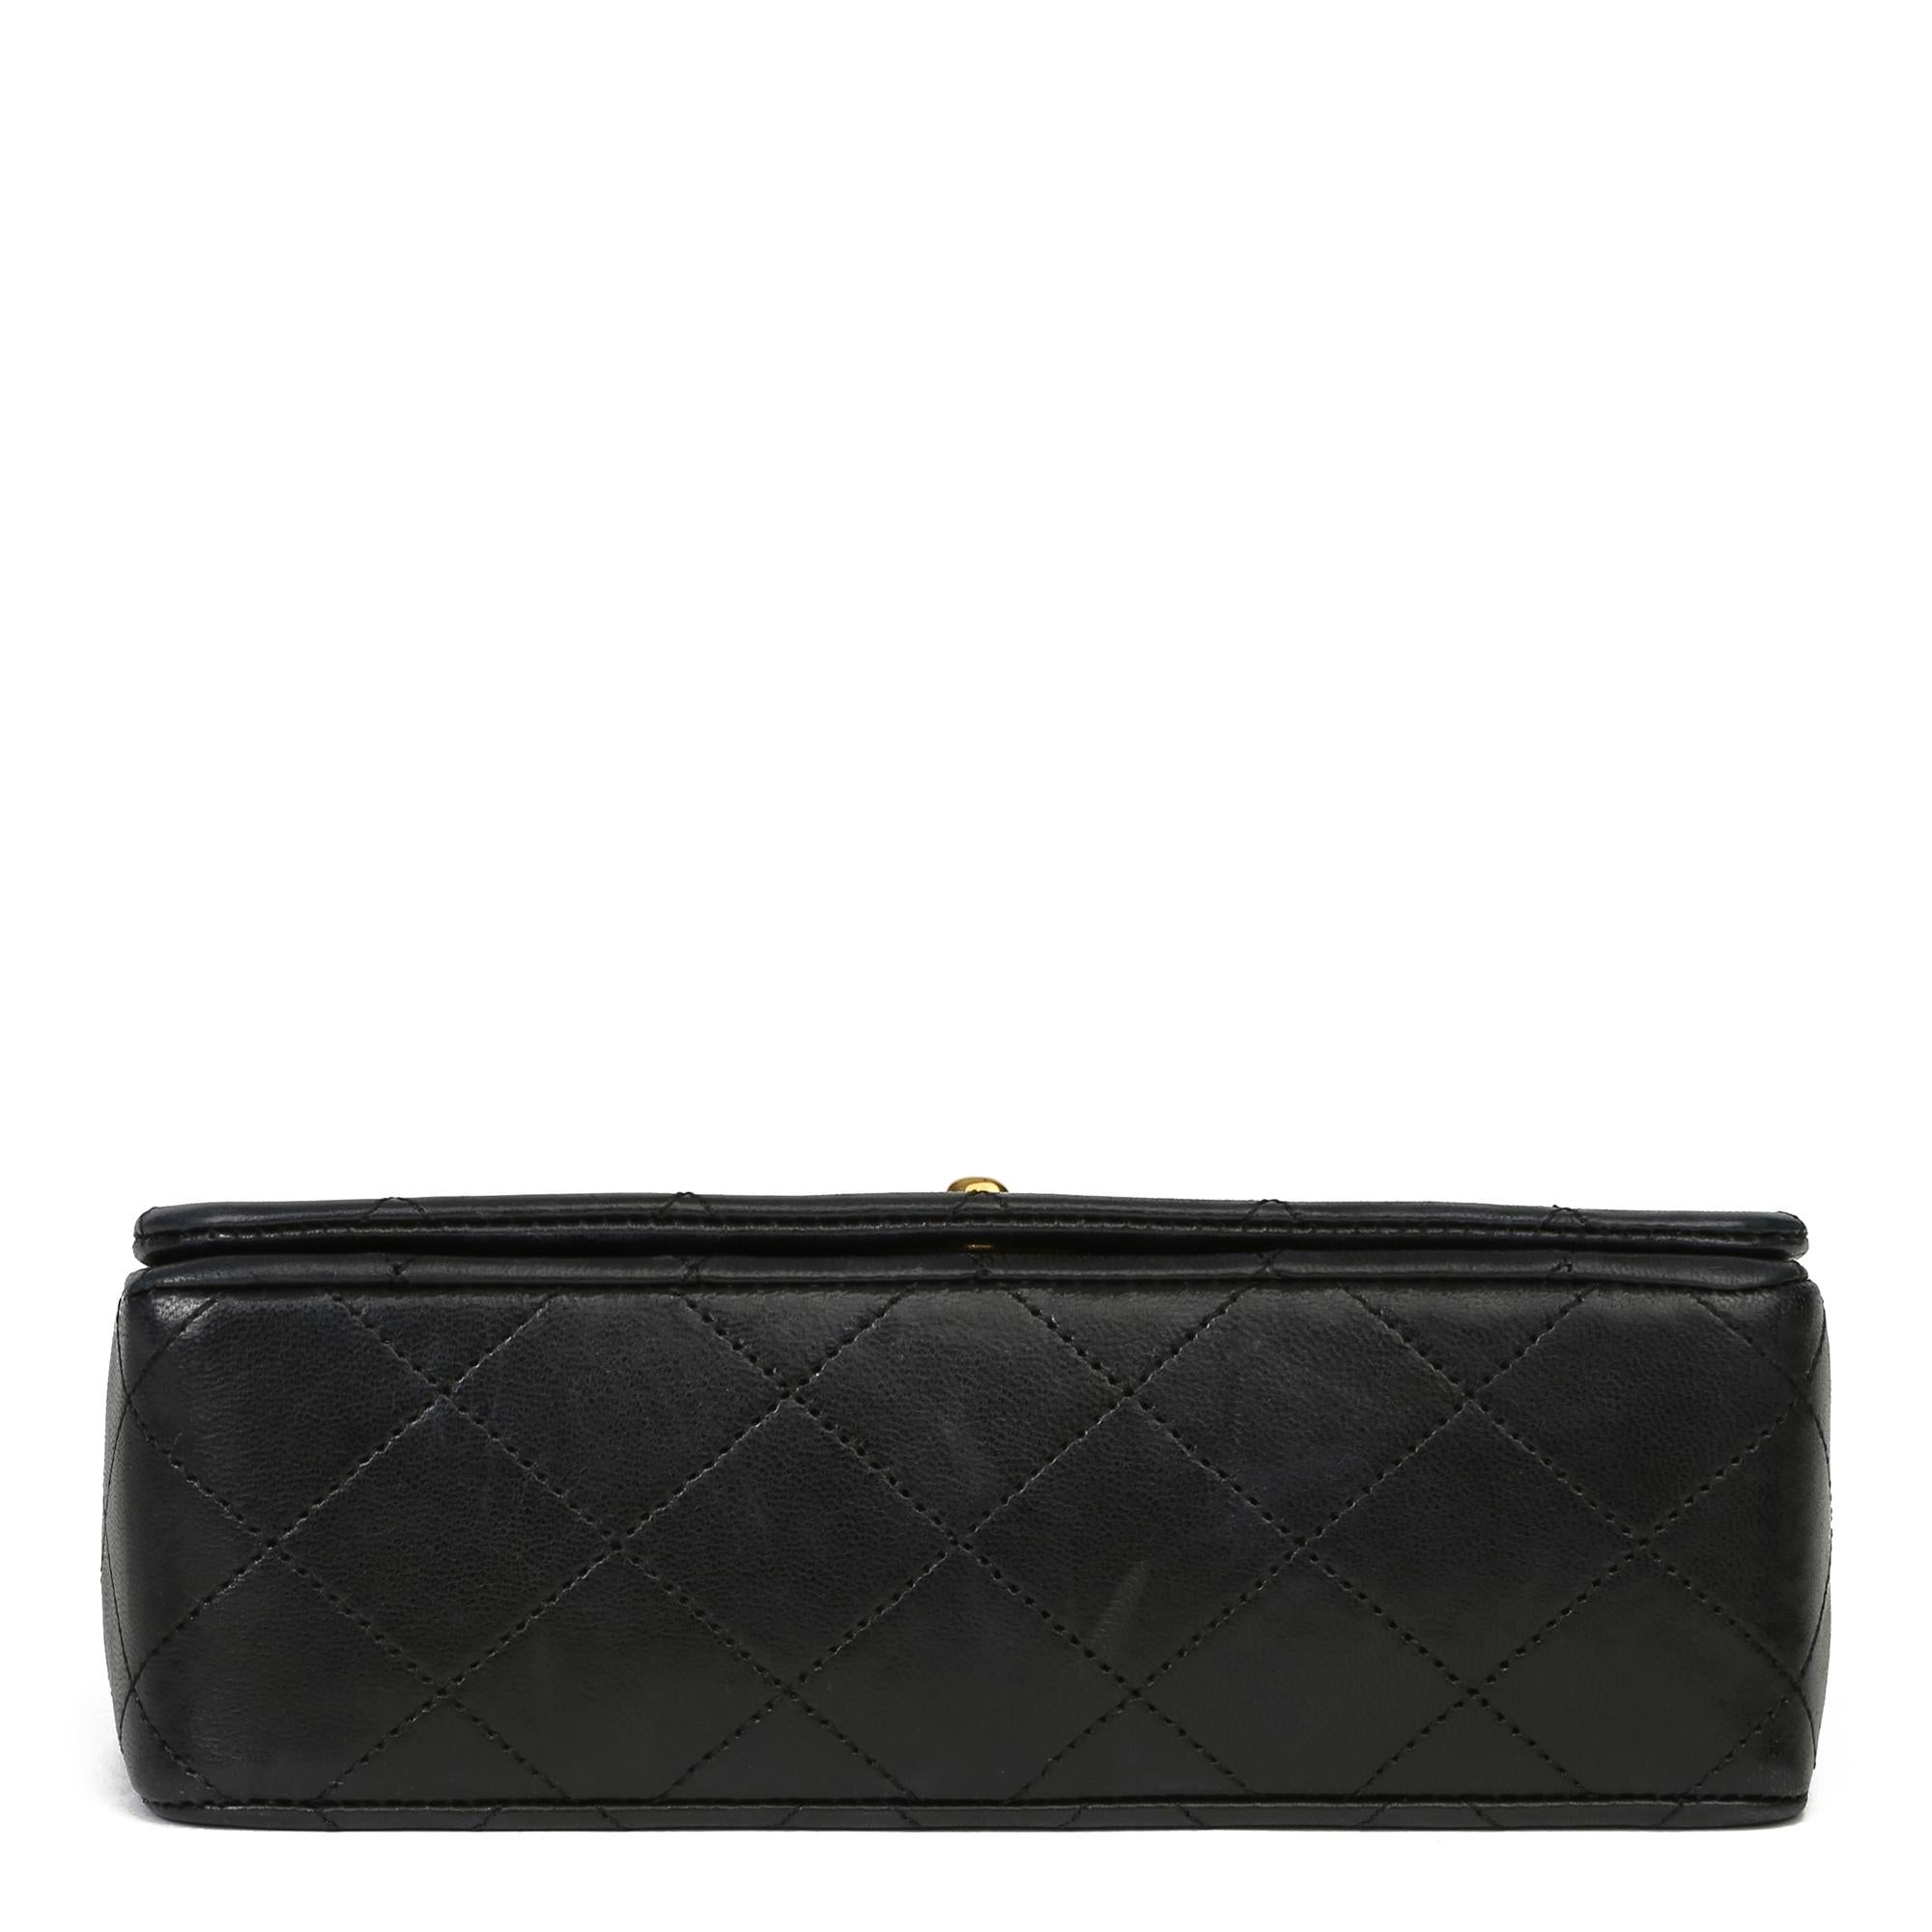 Chanel Black Quilted Lambskin Vintage Mini Flap Bag 2